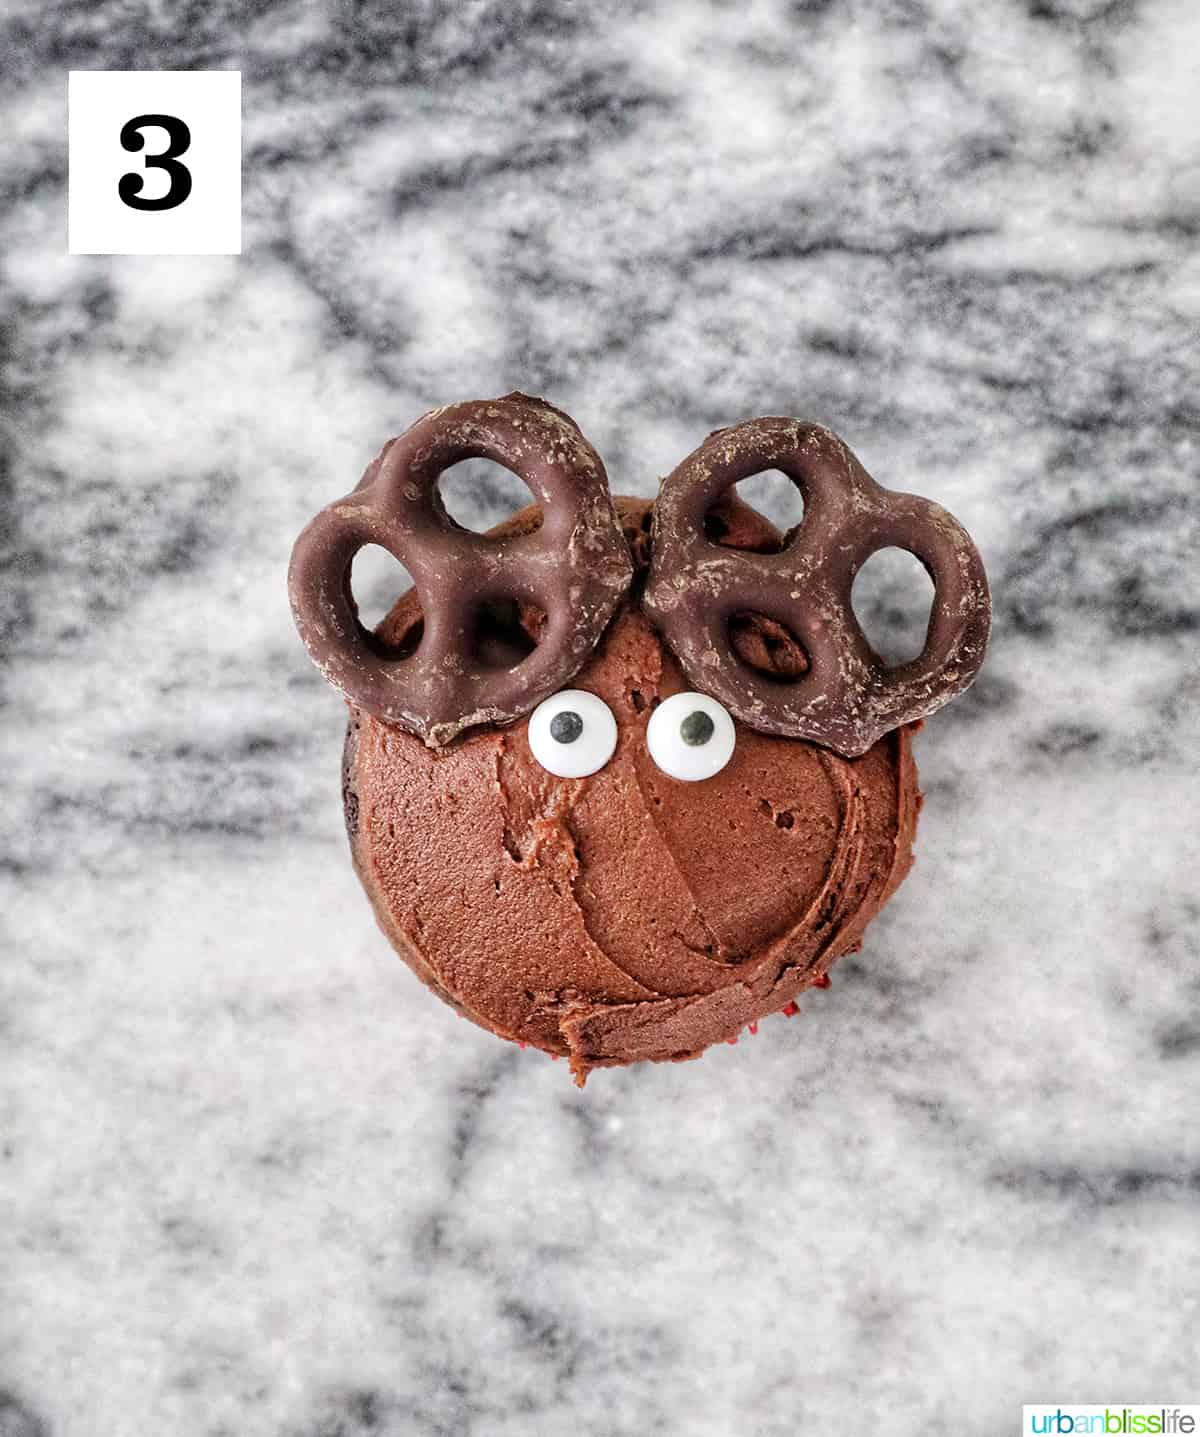 chocolate covered pretzels and candy eyes on top of a chocolate frosted cupcake on a marble counter.